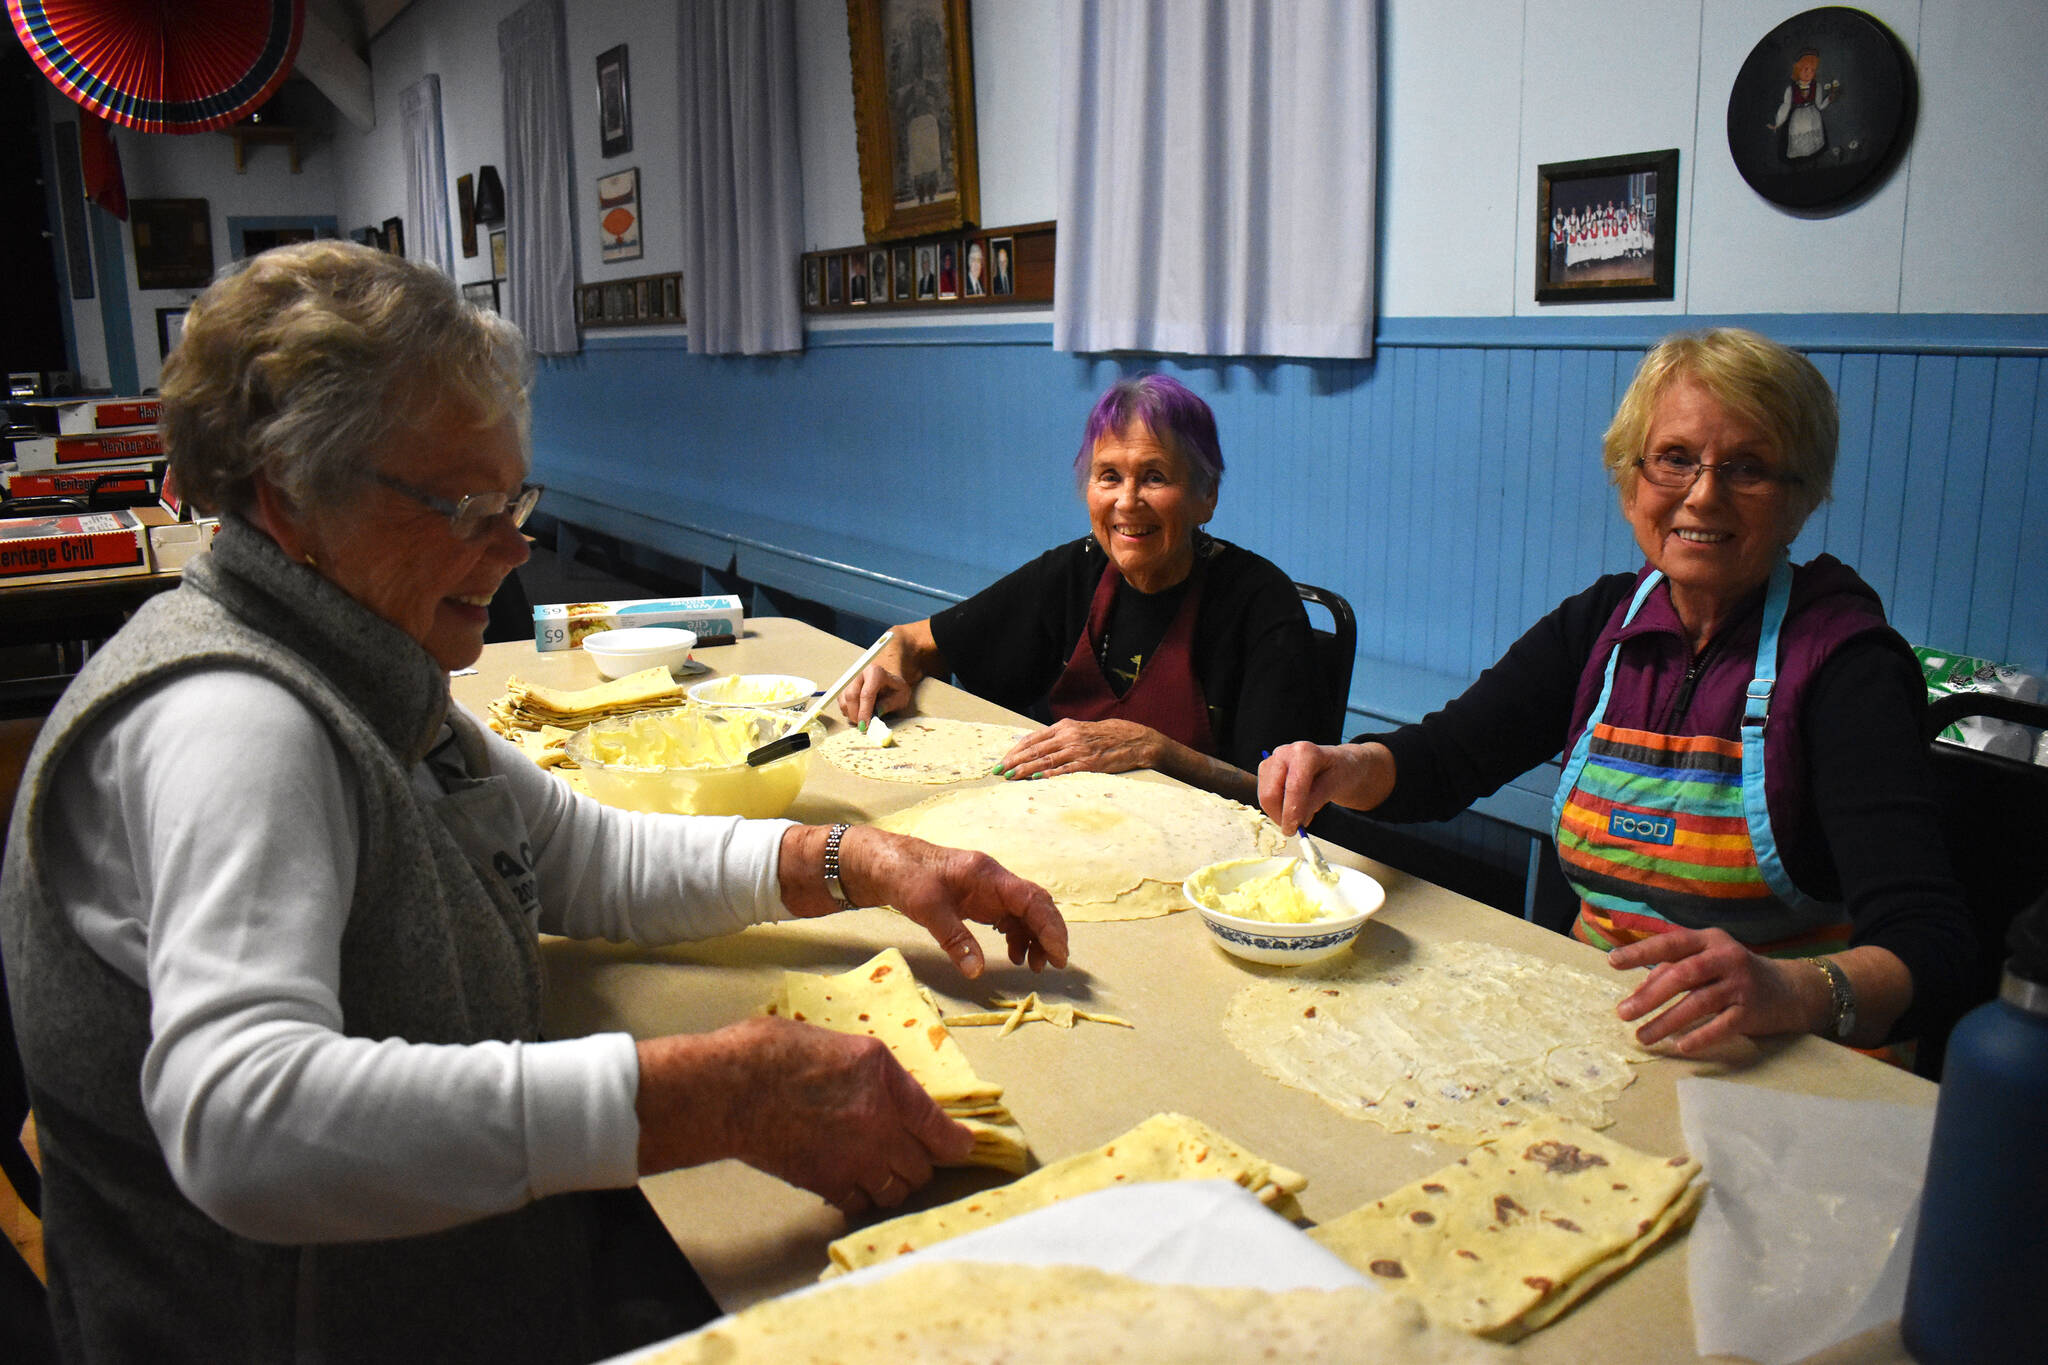 Haldis Totland, Jane Louzan and Ella Seely, from left to right, slather creamy butter onto the Lefse before folding it. While they worked, they happily shared stories, talked about the societal difficulties upon immigrating to the United States and called for more butter when they ran out. Dixie Thompson, lodge president of the Sons of Norway Grays Harbor, championed Totland and Seely’s skillset in making Lefse. “Ella and Haldis are both from Norway and they know how to do everything,” Thompson said. (Matthew N. Wells / The Daily World)(Matthew N. Wells / The Daily World)